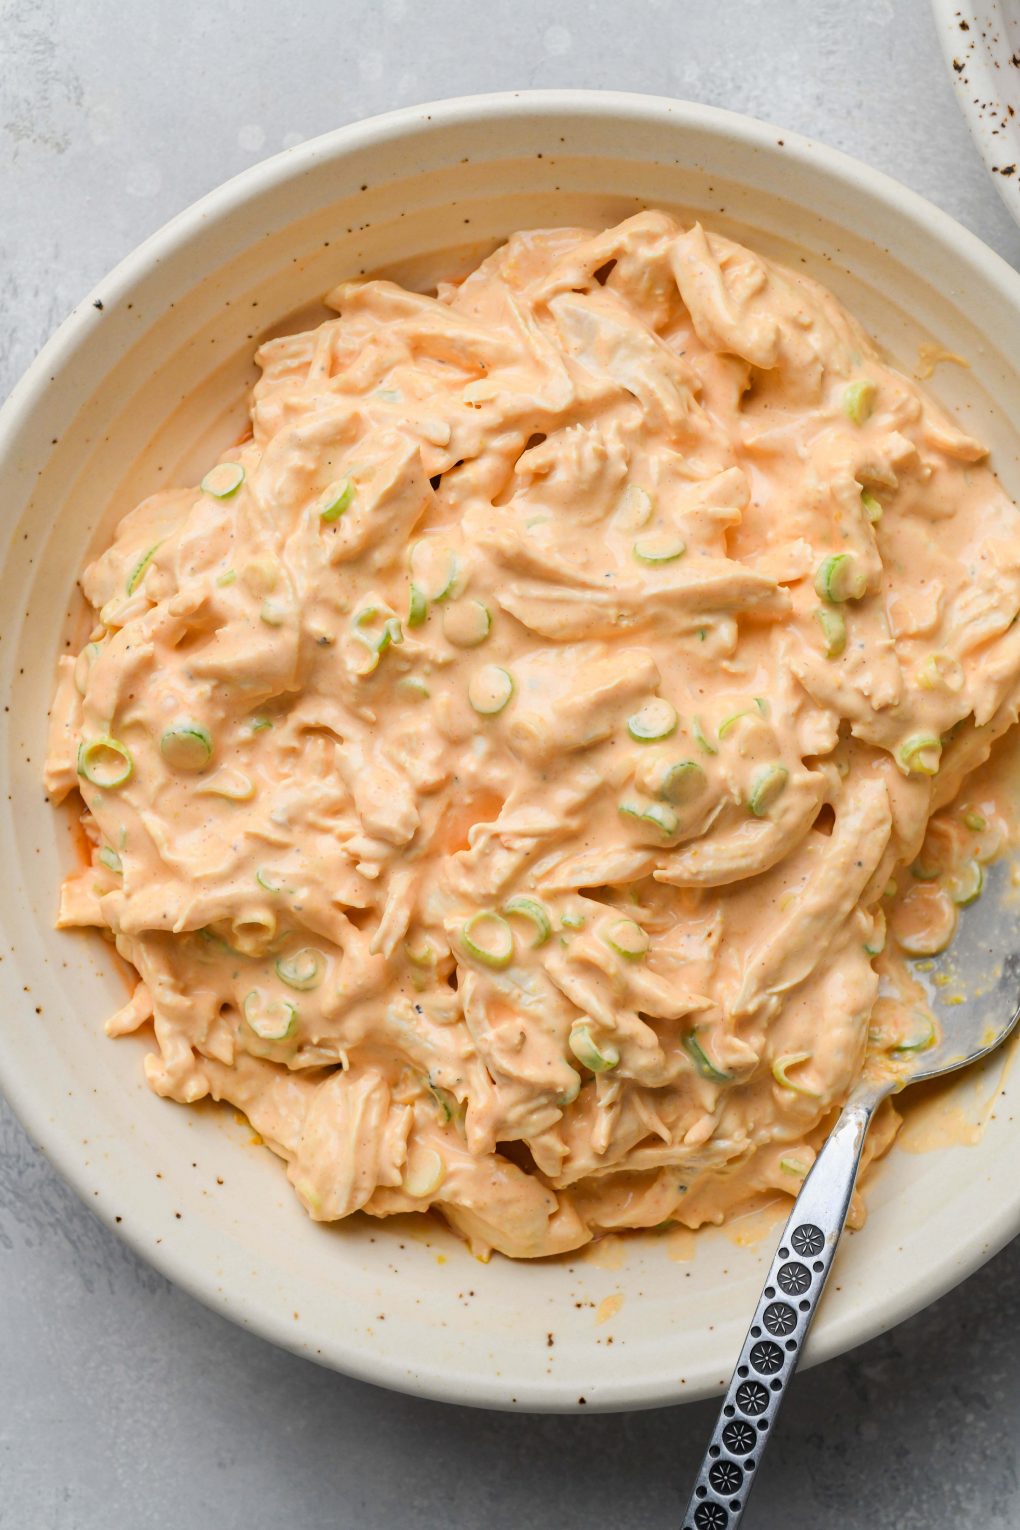 Image of a large bowl filled with the ingredients for buffalo shredded chicken all mixed together- shredded chicken, mayo, green onions, hot sauce, and spices.